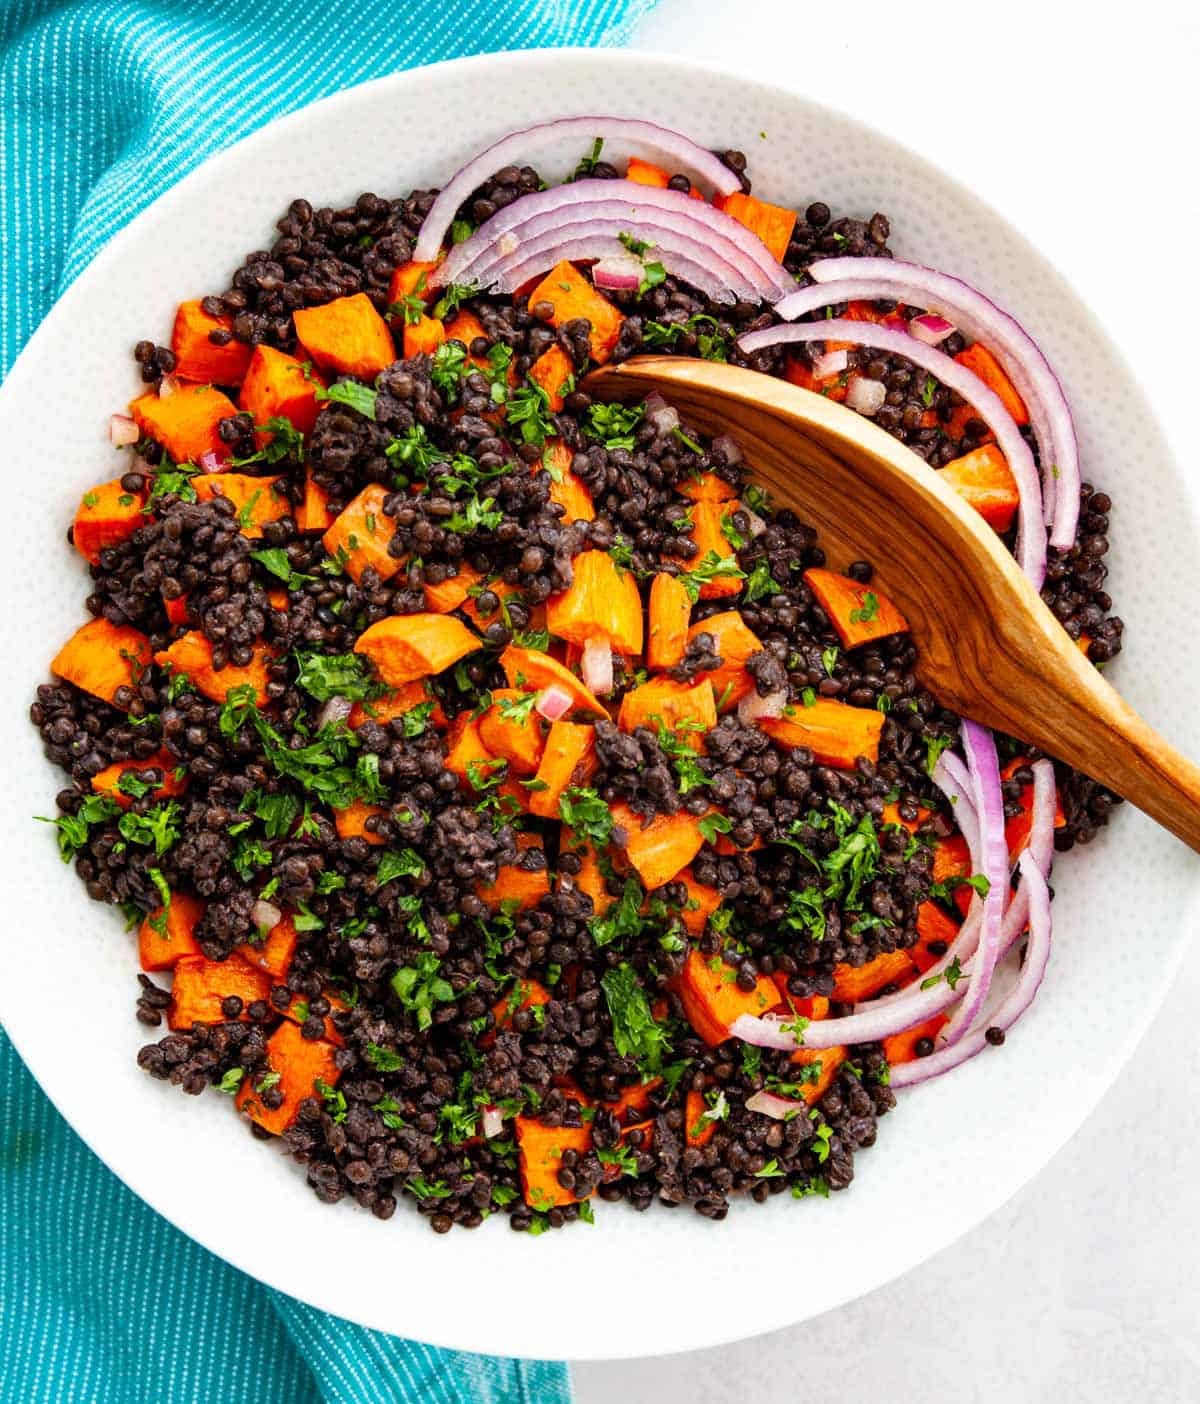 serving bowl of beluga black lentils with cubed sweet potato, parsley and red onion